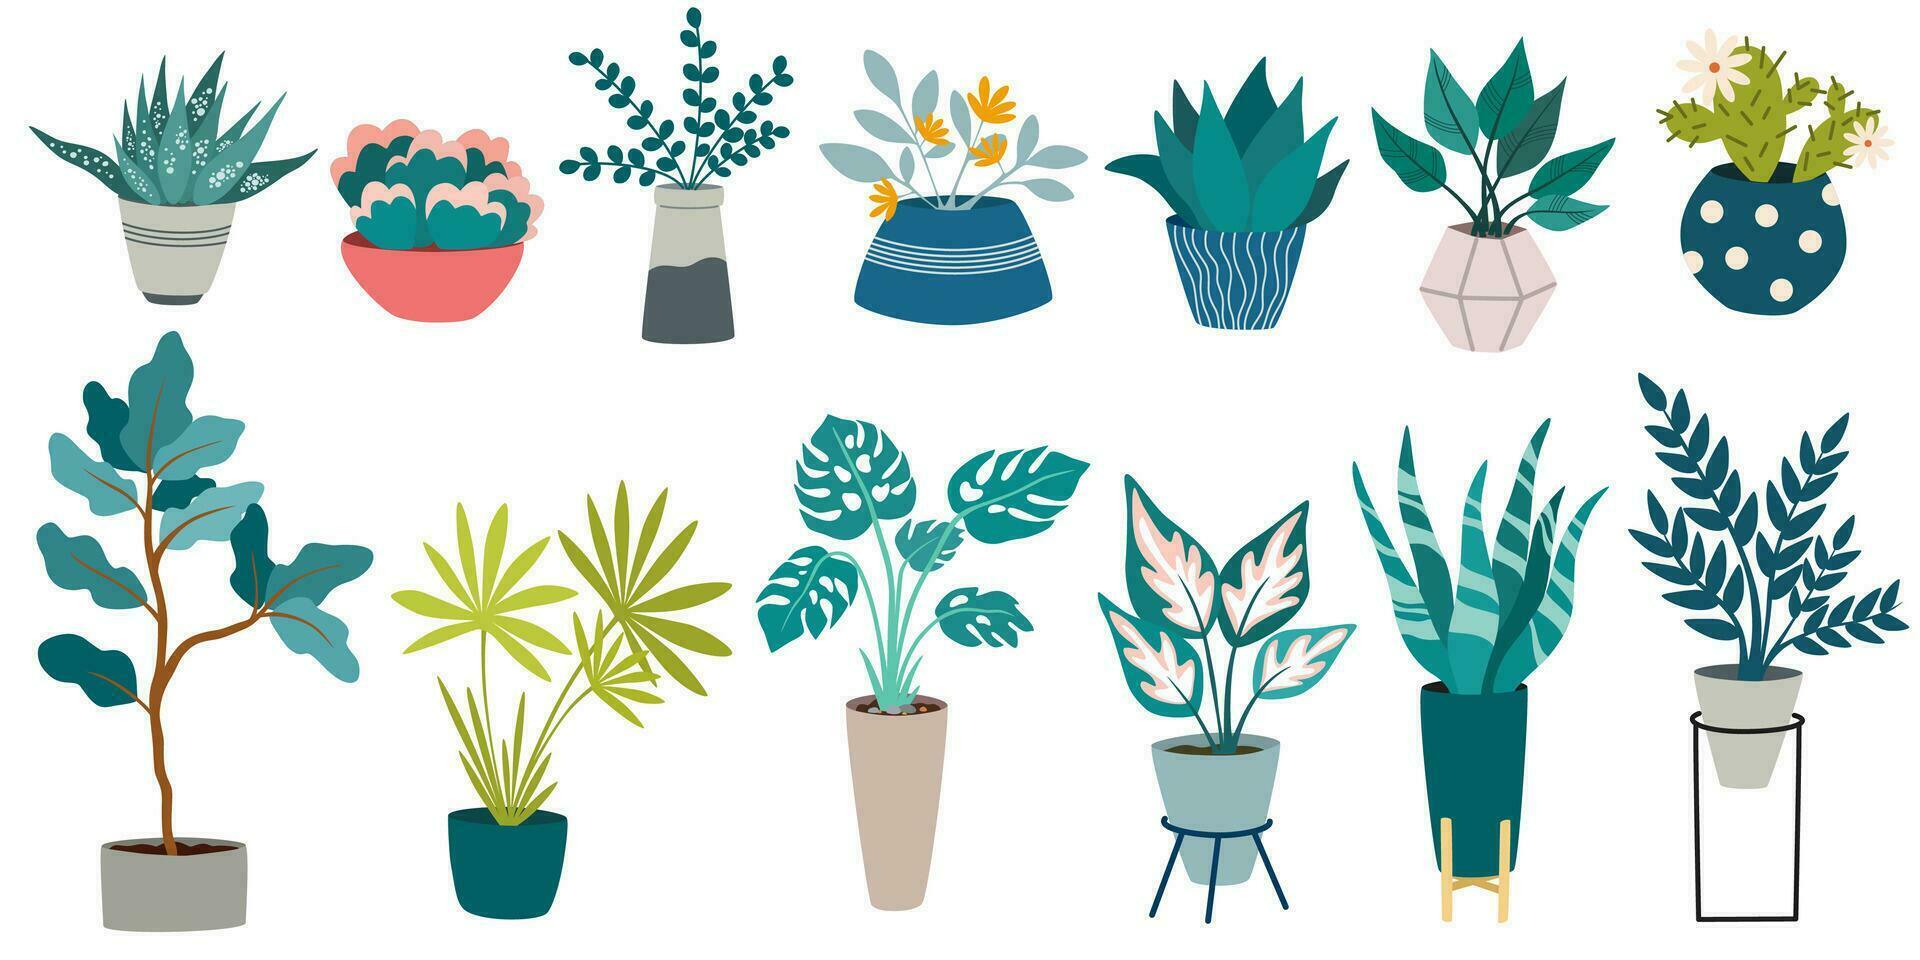 House plants, Urban jungle, fashionable home decor with plants, cacti, tropical leaves in stylish pots and pots. Flat vector illustration isolated on white background